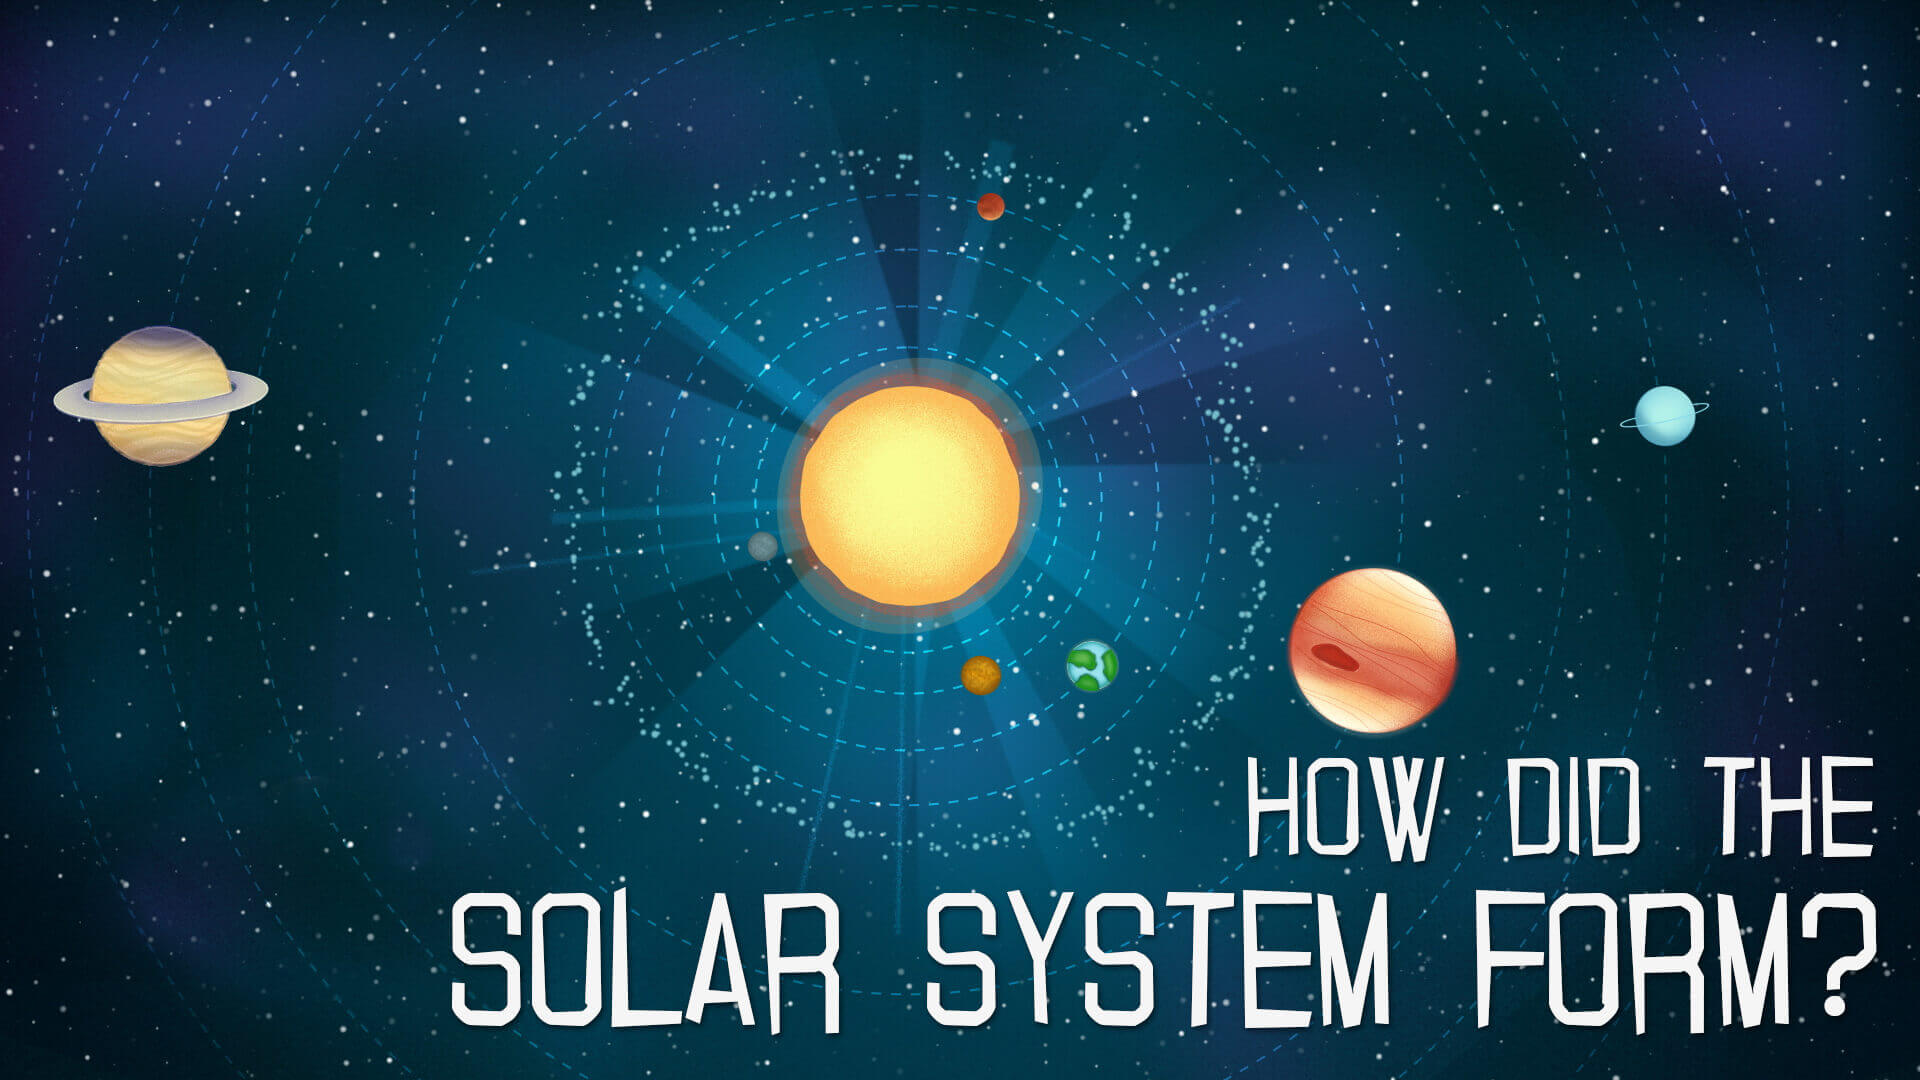 Educational animation films for children for Royal Observatory Greenwich - How did the Solar System form